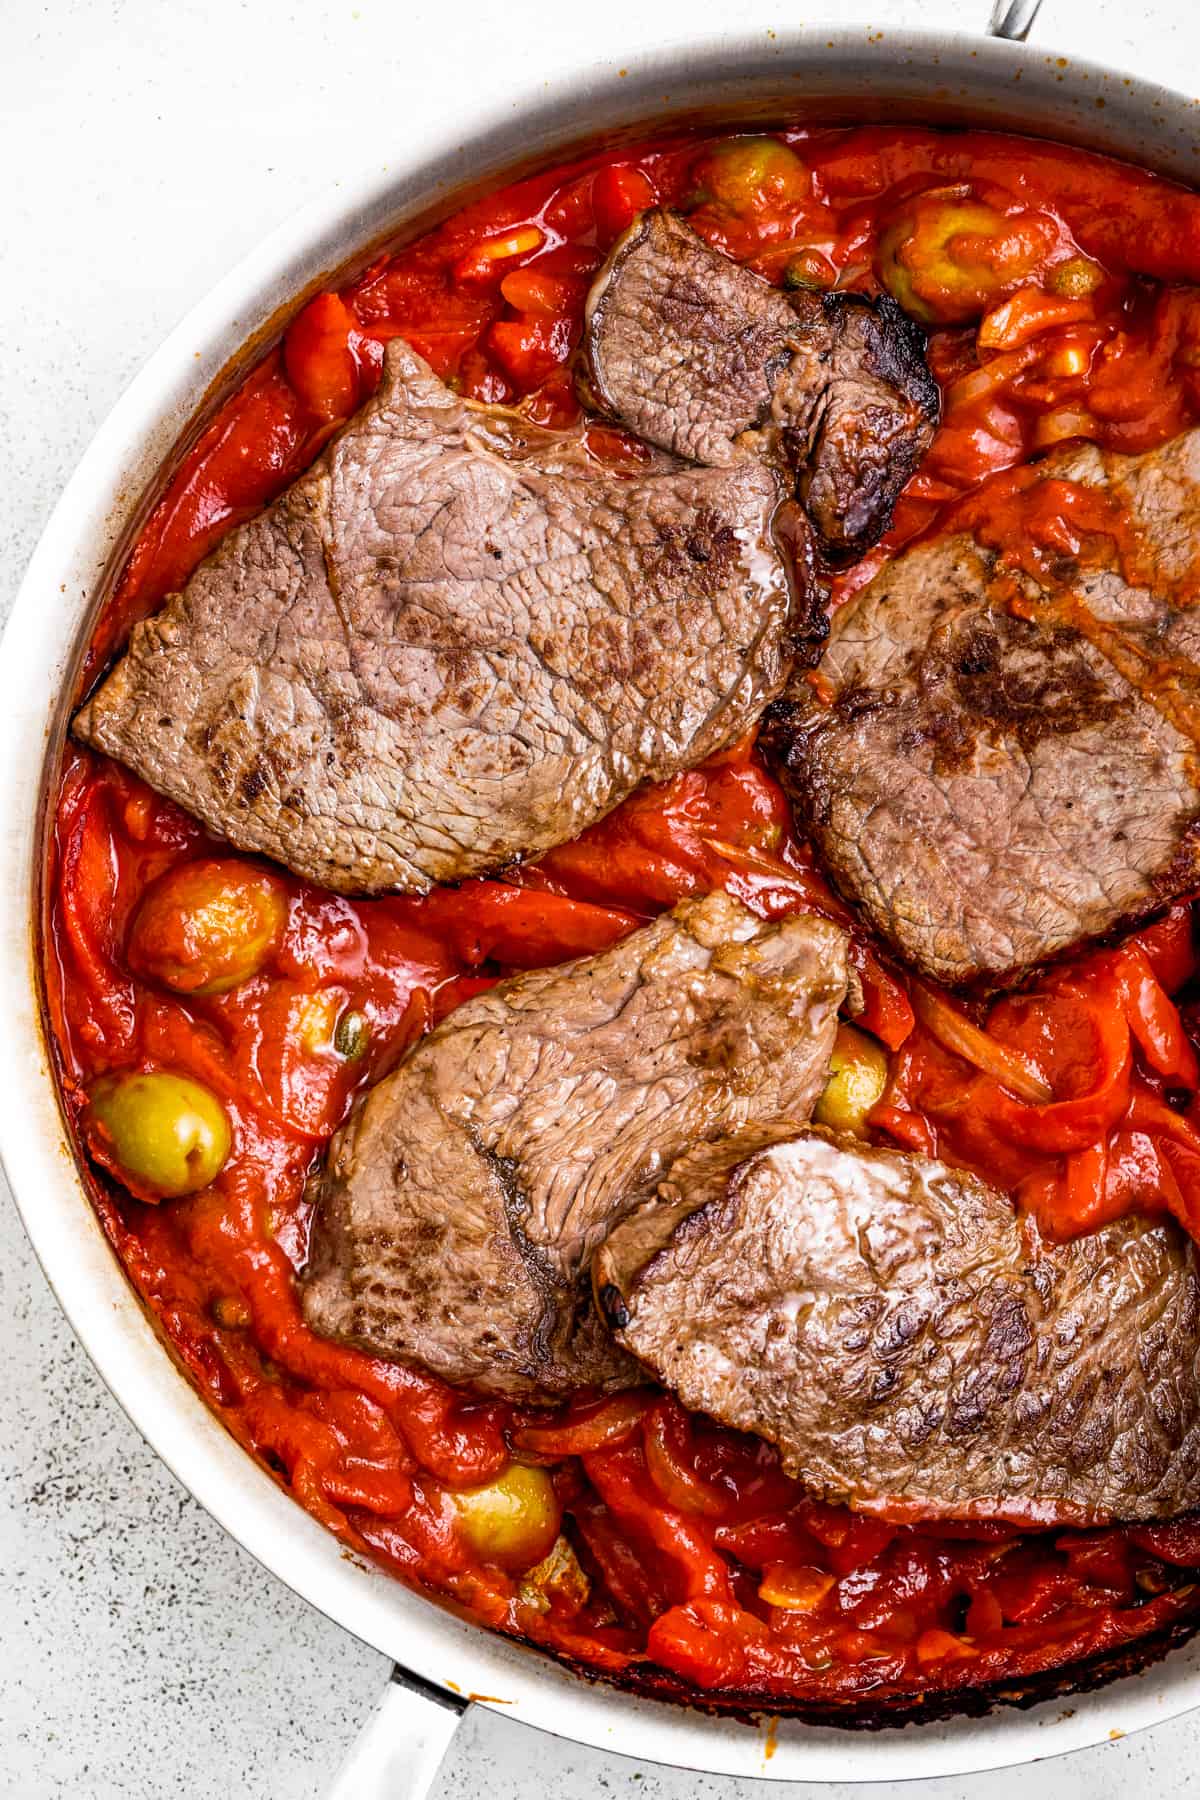 Adding seared steak to a pan full of tomato sauce and veggies.